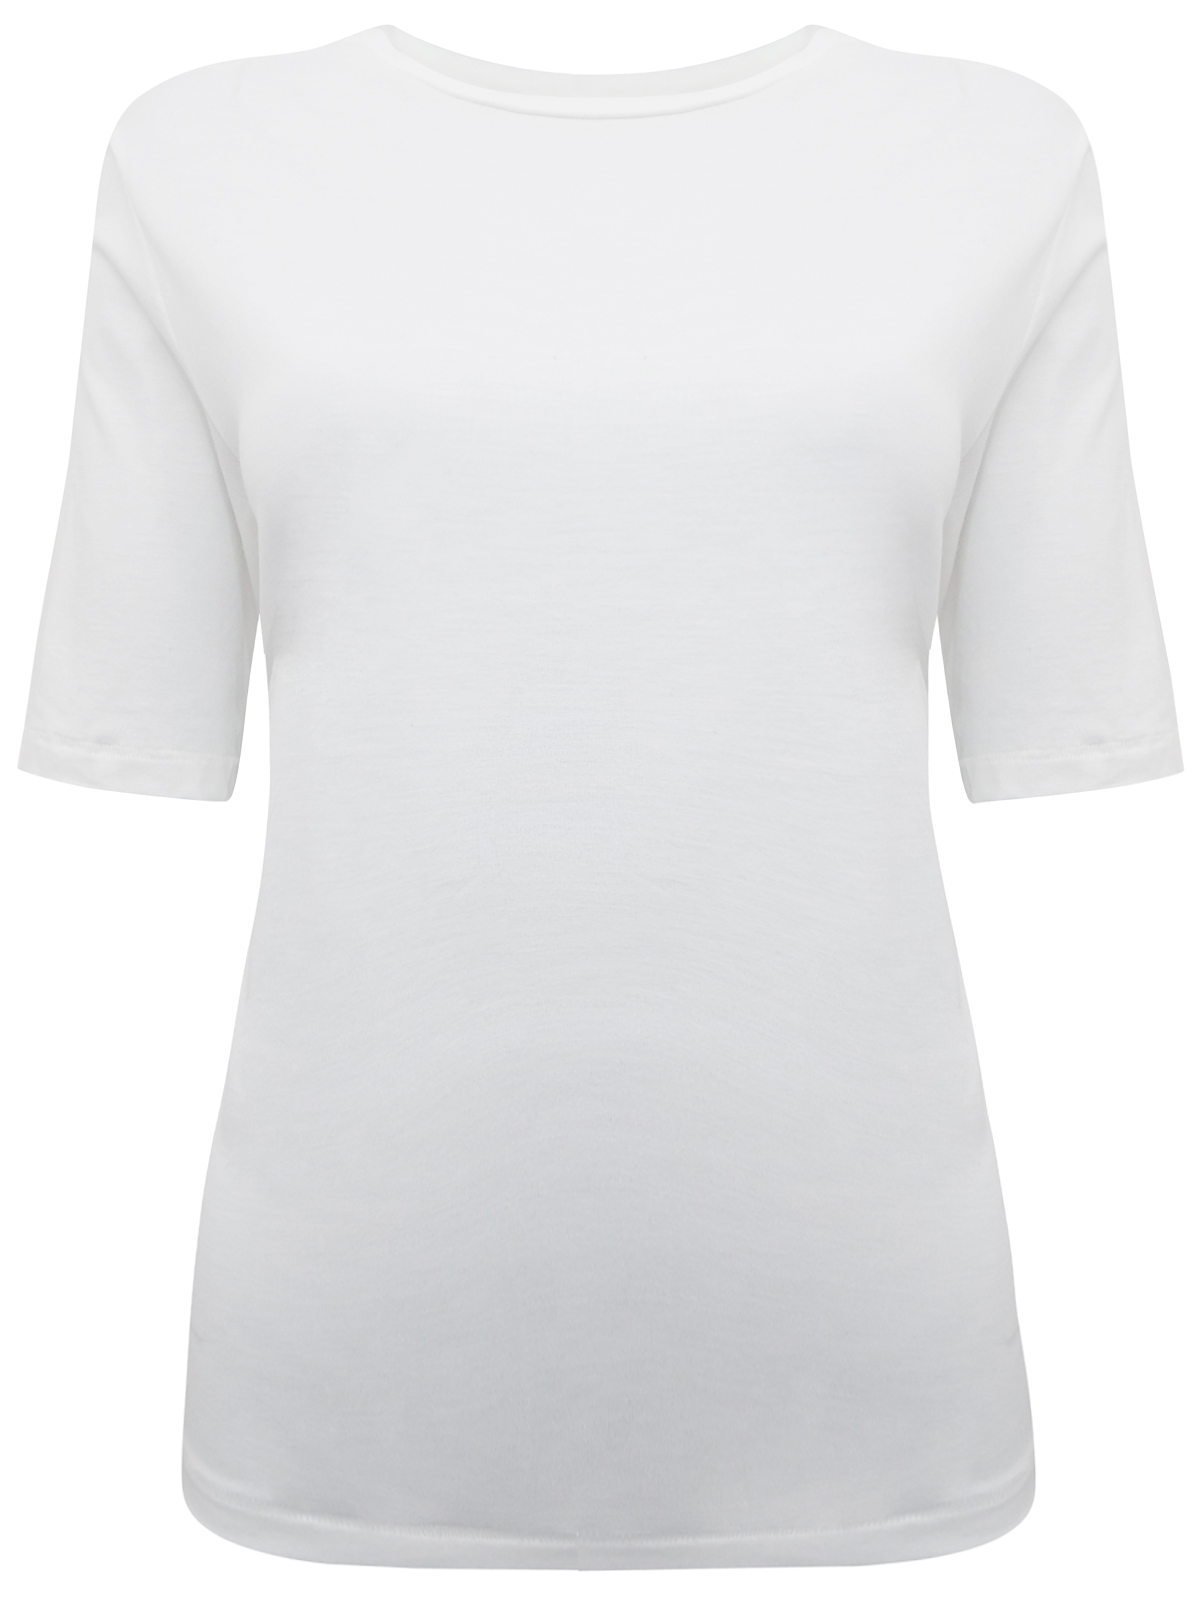 Marks and Spencer - - M&5 SOFT-WHITE Half Sleeve T-Shirt - Size 12 to 22